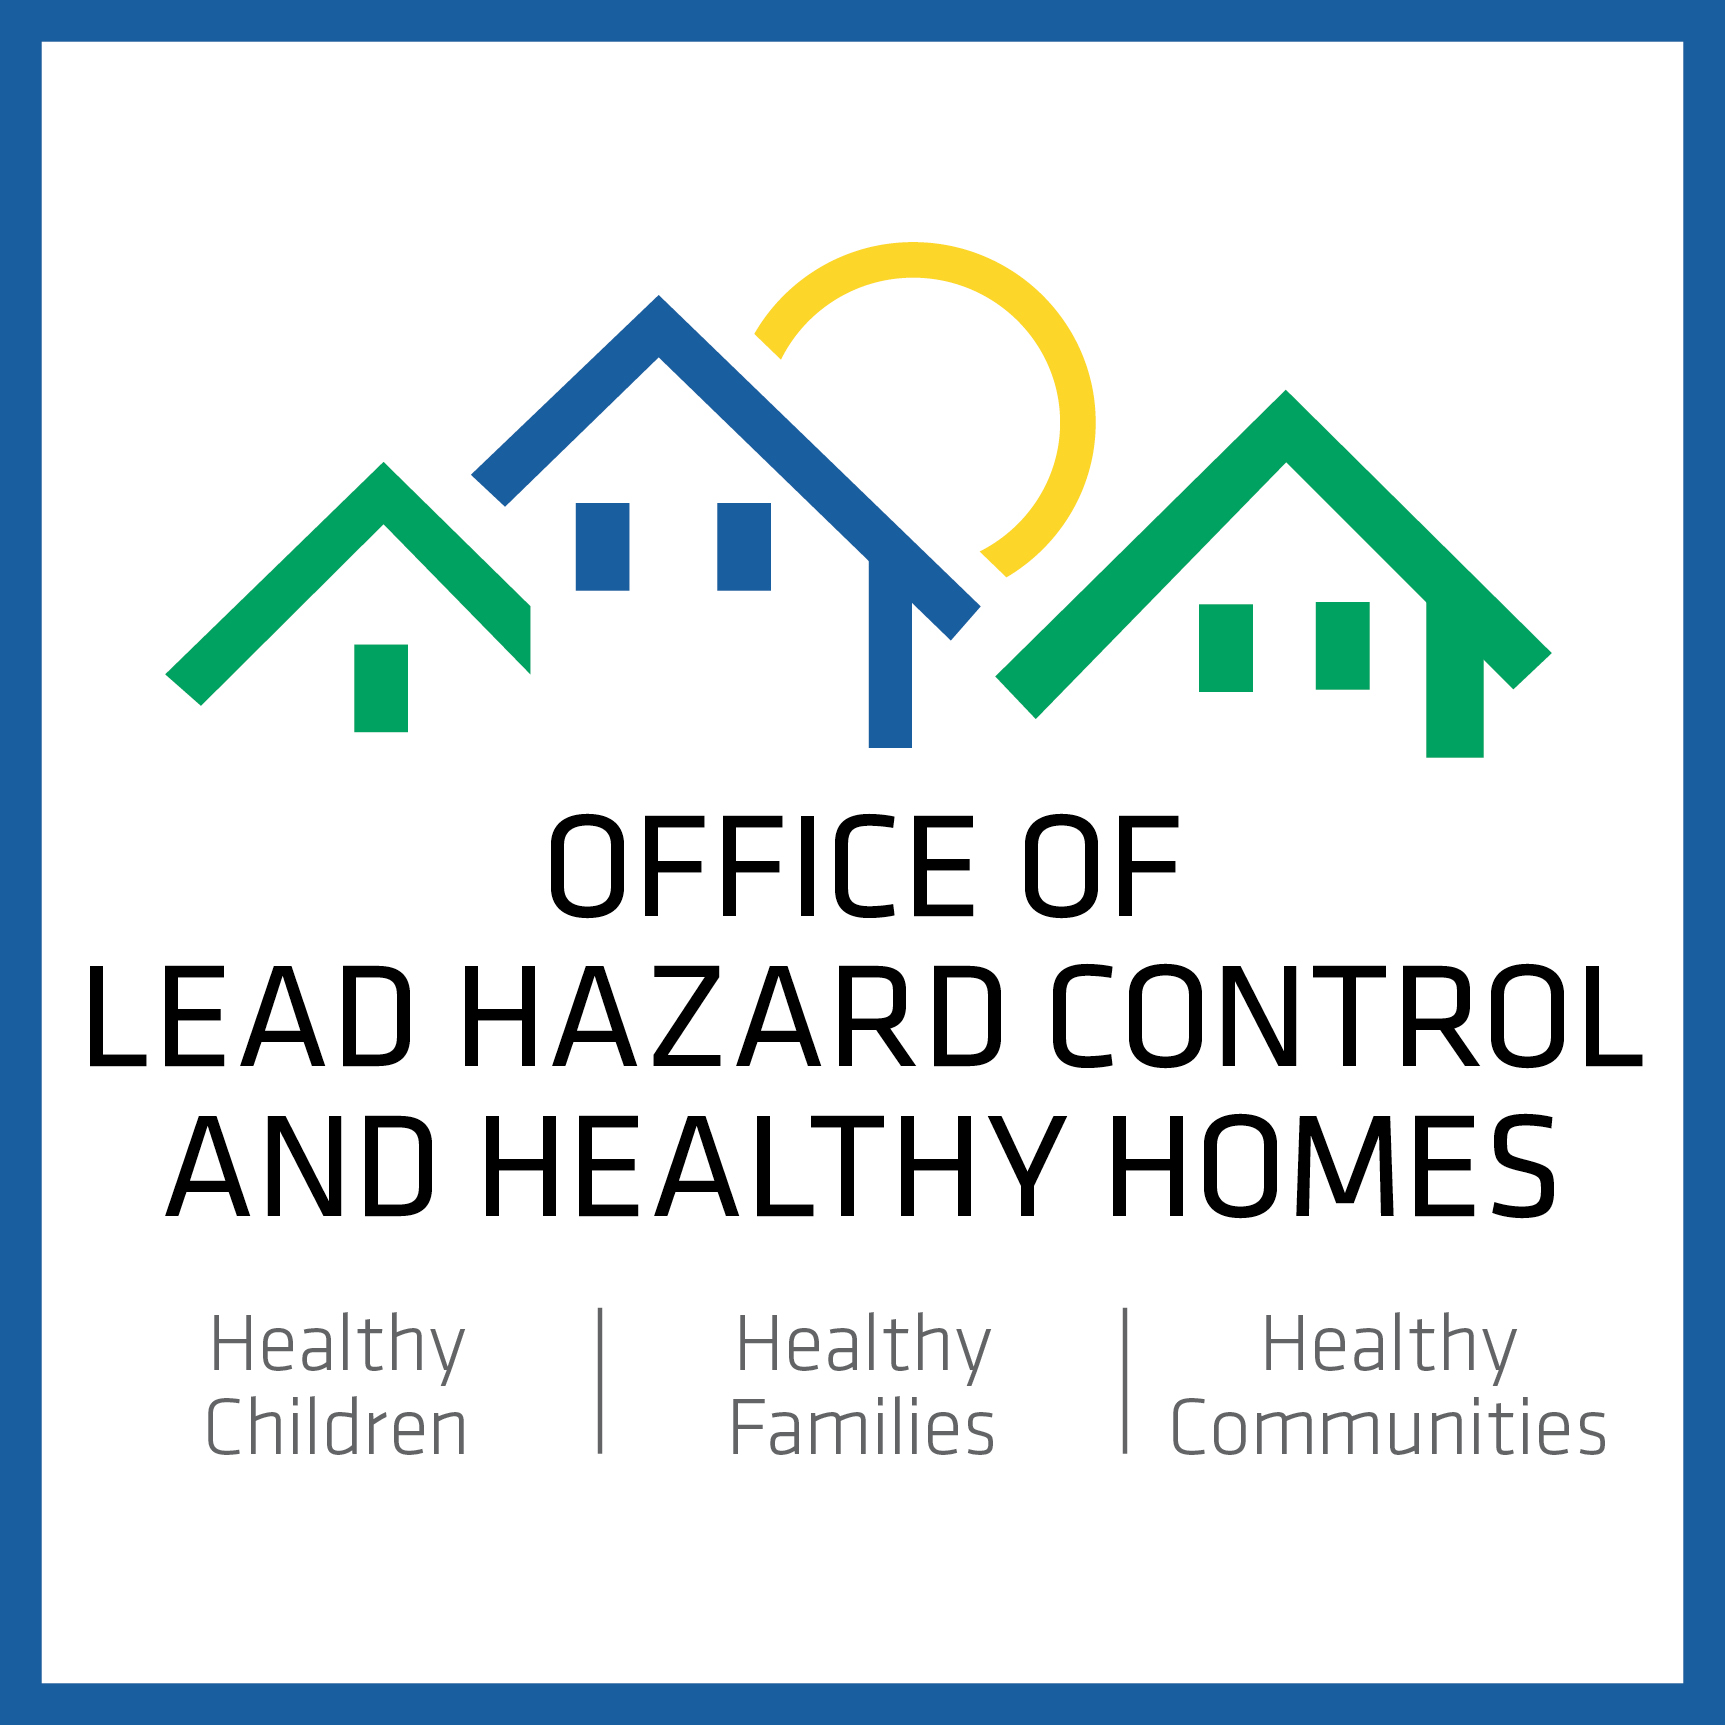 Office of Lead Hazard Control and Healthy Homes logo